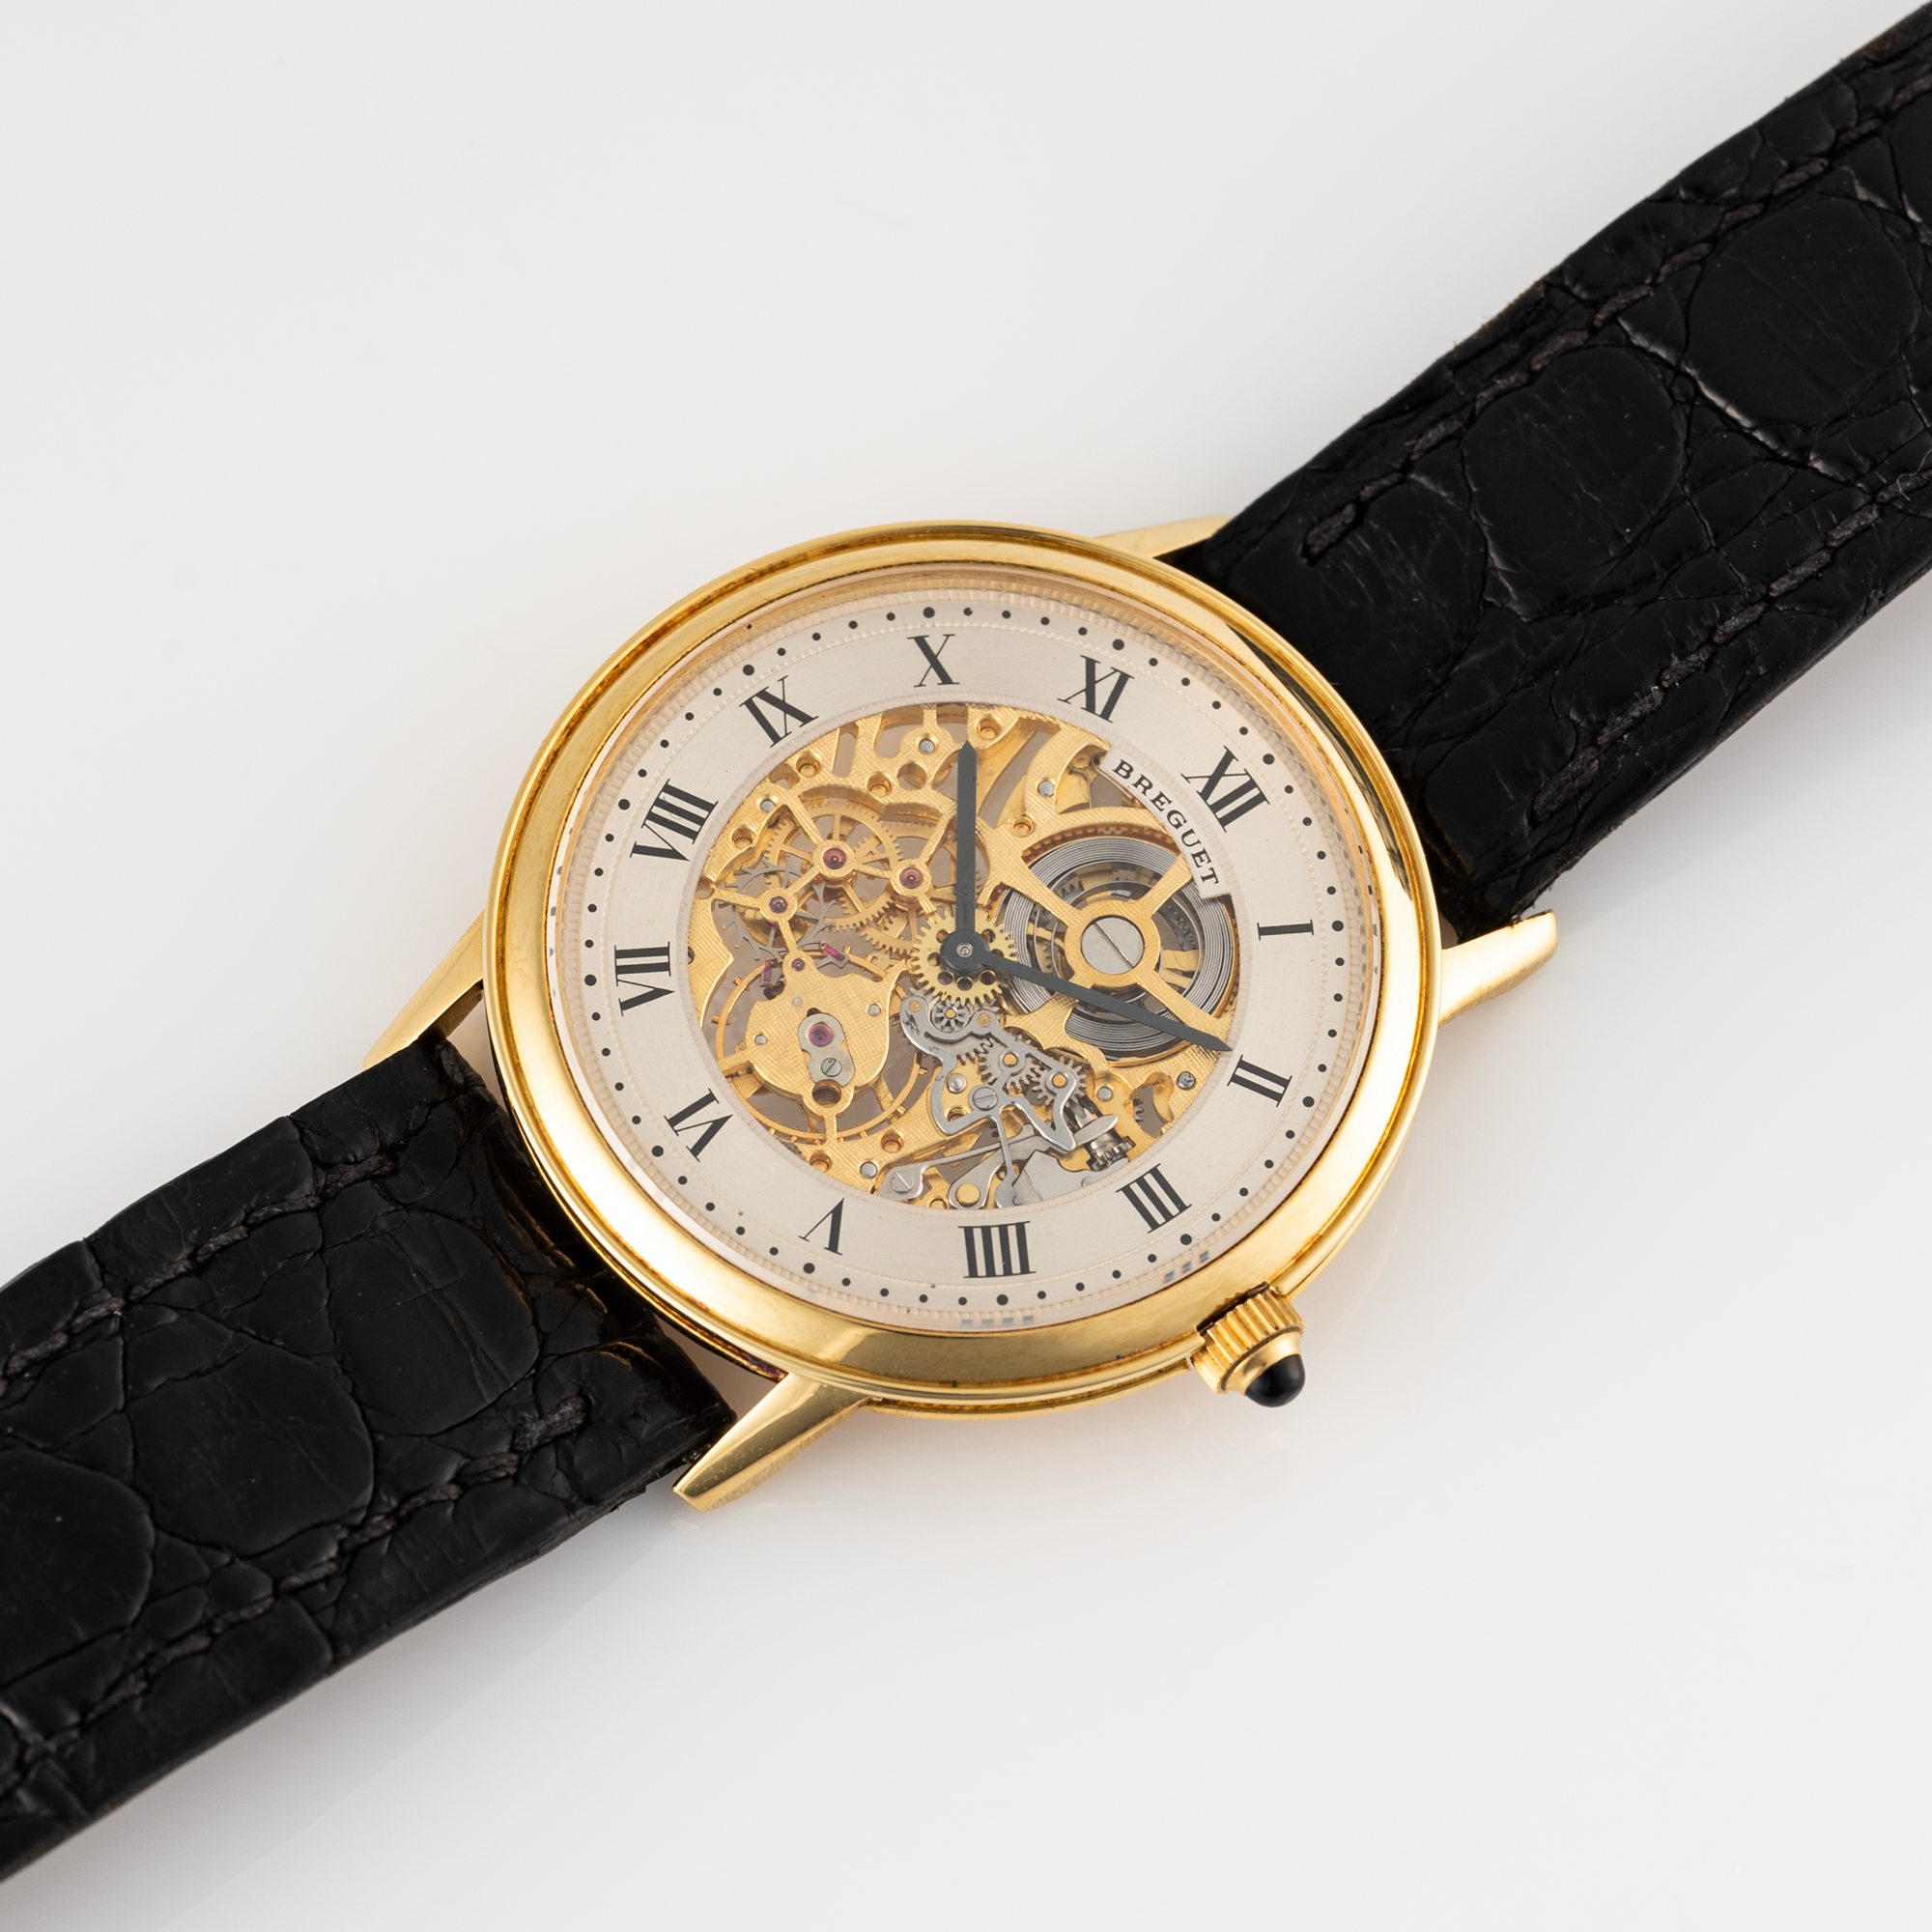 A VERY RARE GENTLEMAN'S SIZE 18K SOLID GOLD BREGUET CLASSIQUE EXTRA PLAT SKELETONISED WRIST WATCH - Image 5 of 9